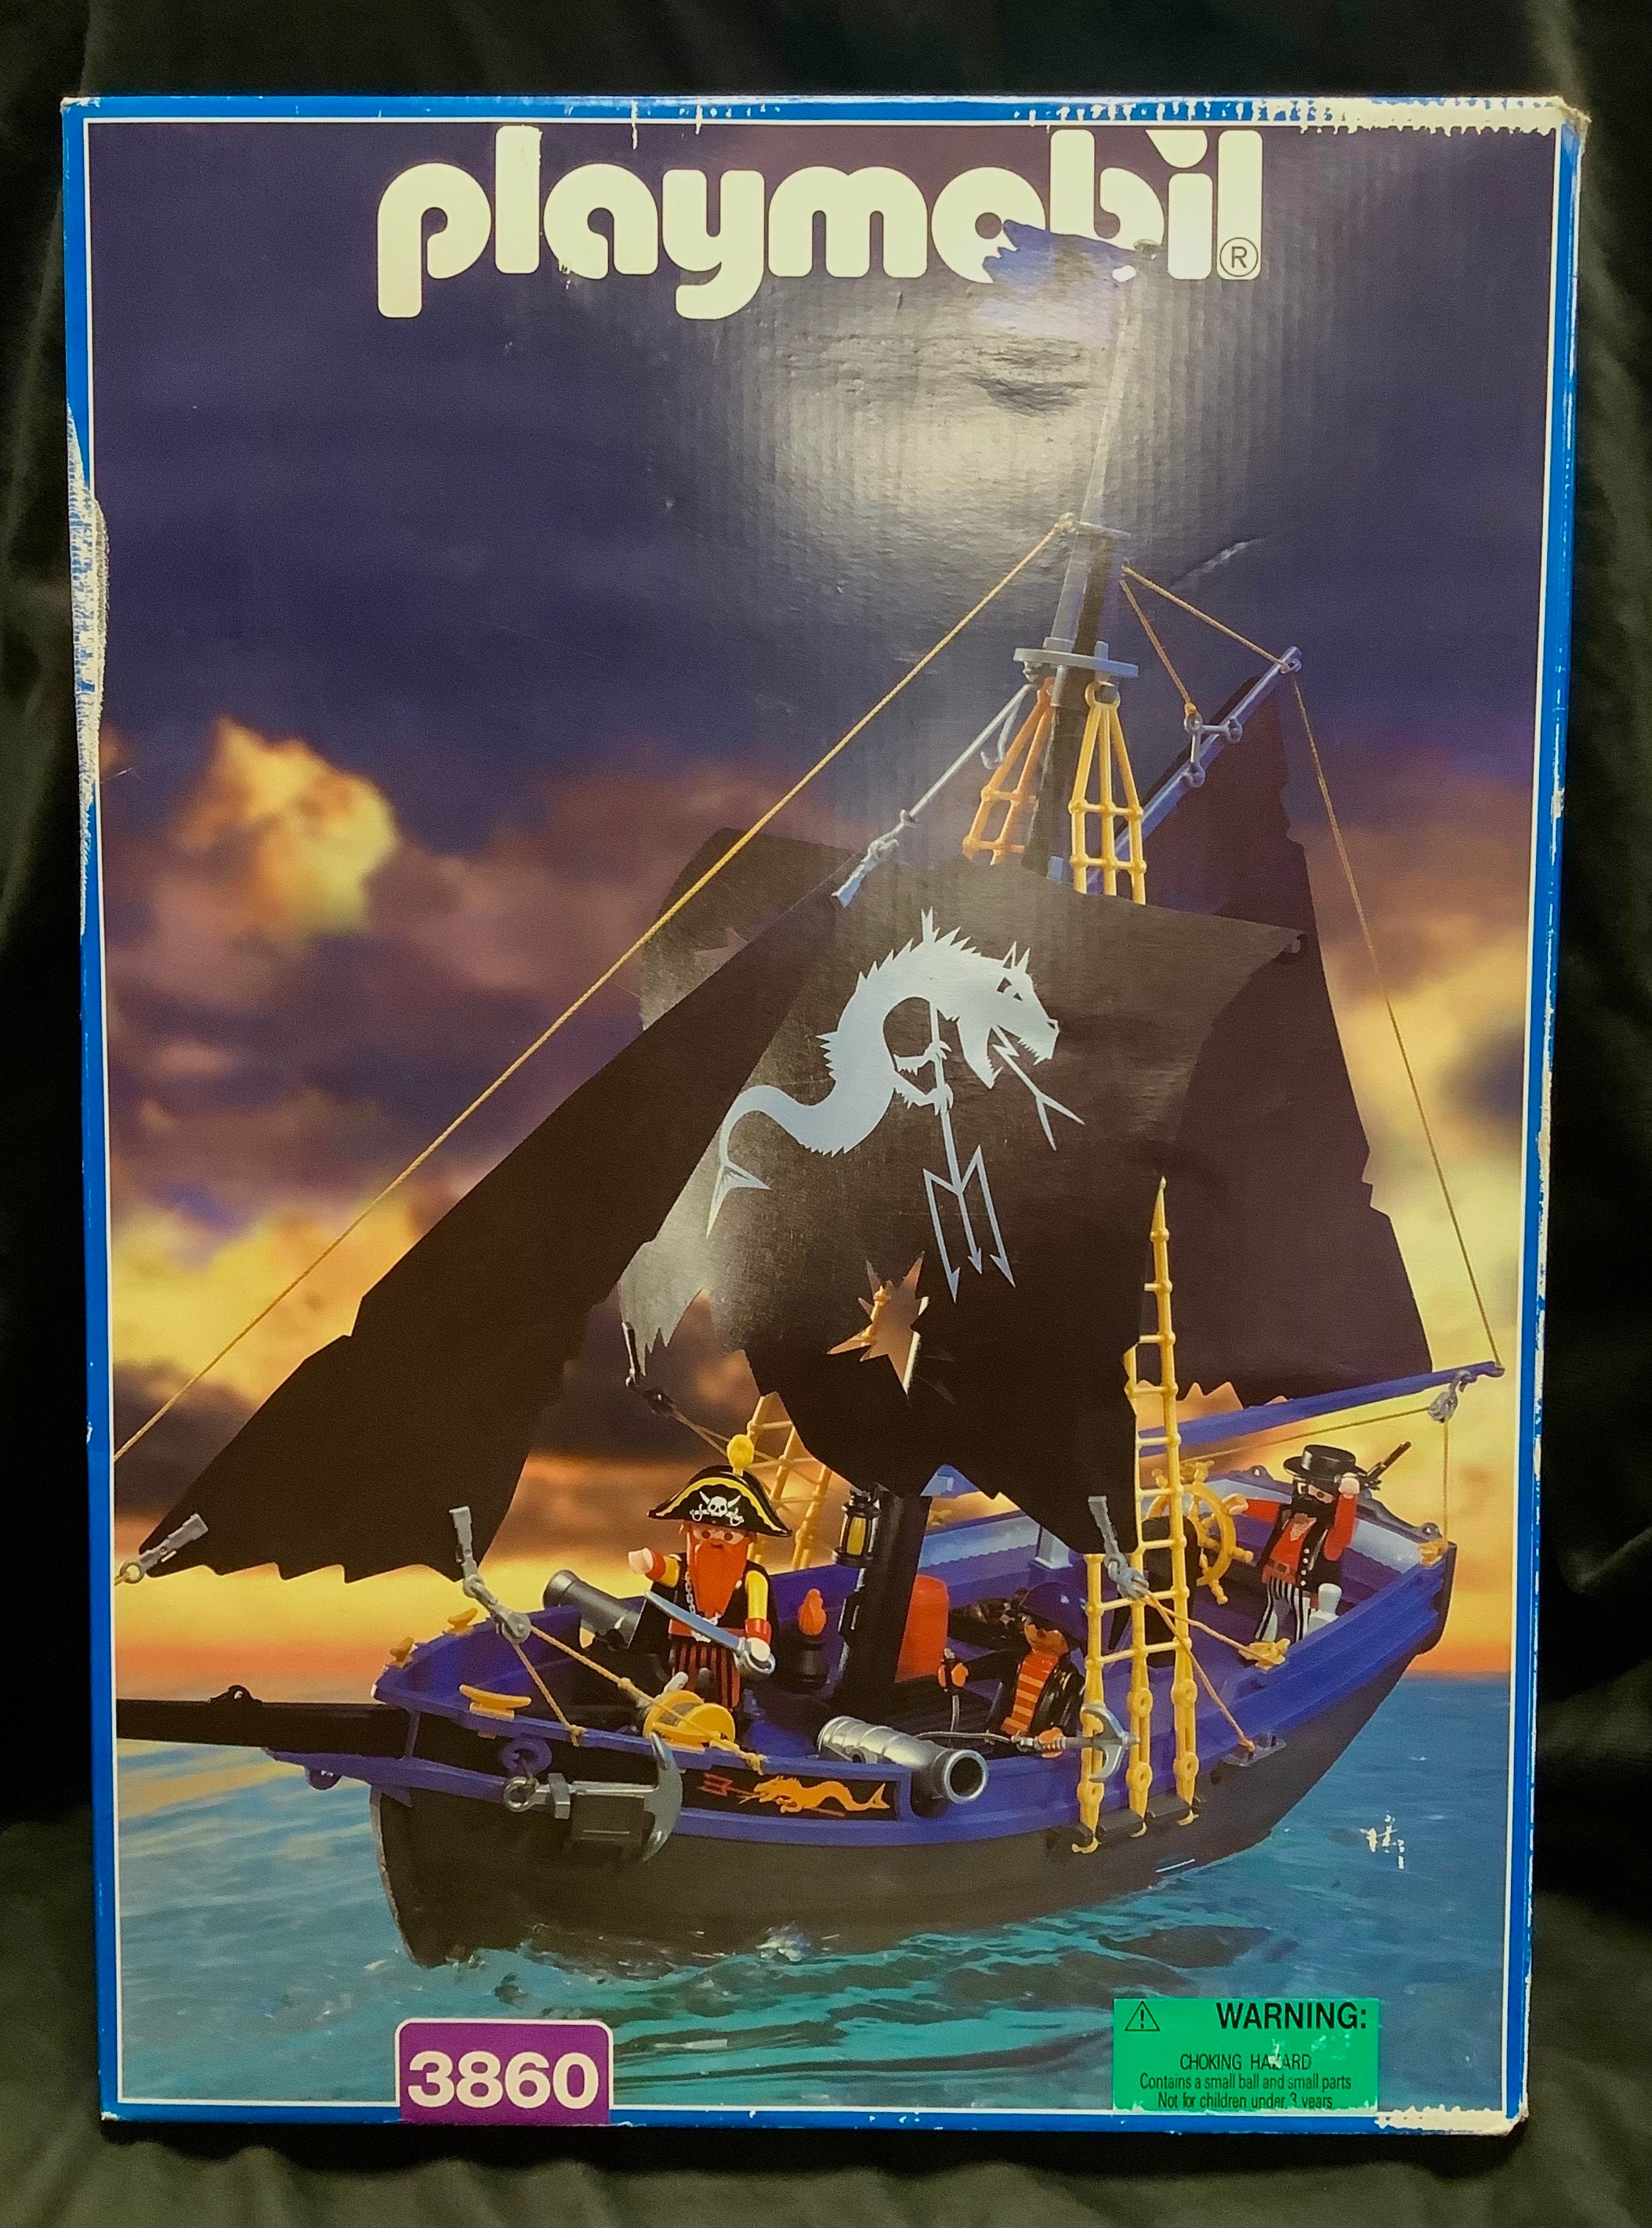 Playmobil Pirates Sailing Ship of the Soldiers - 70412 for sale online